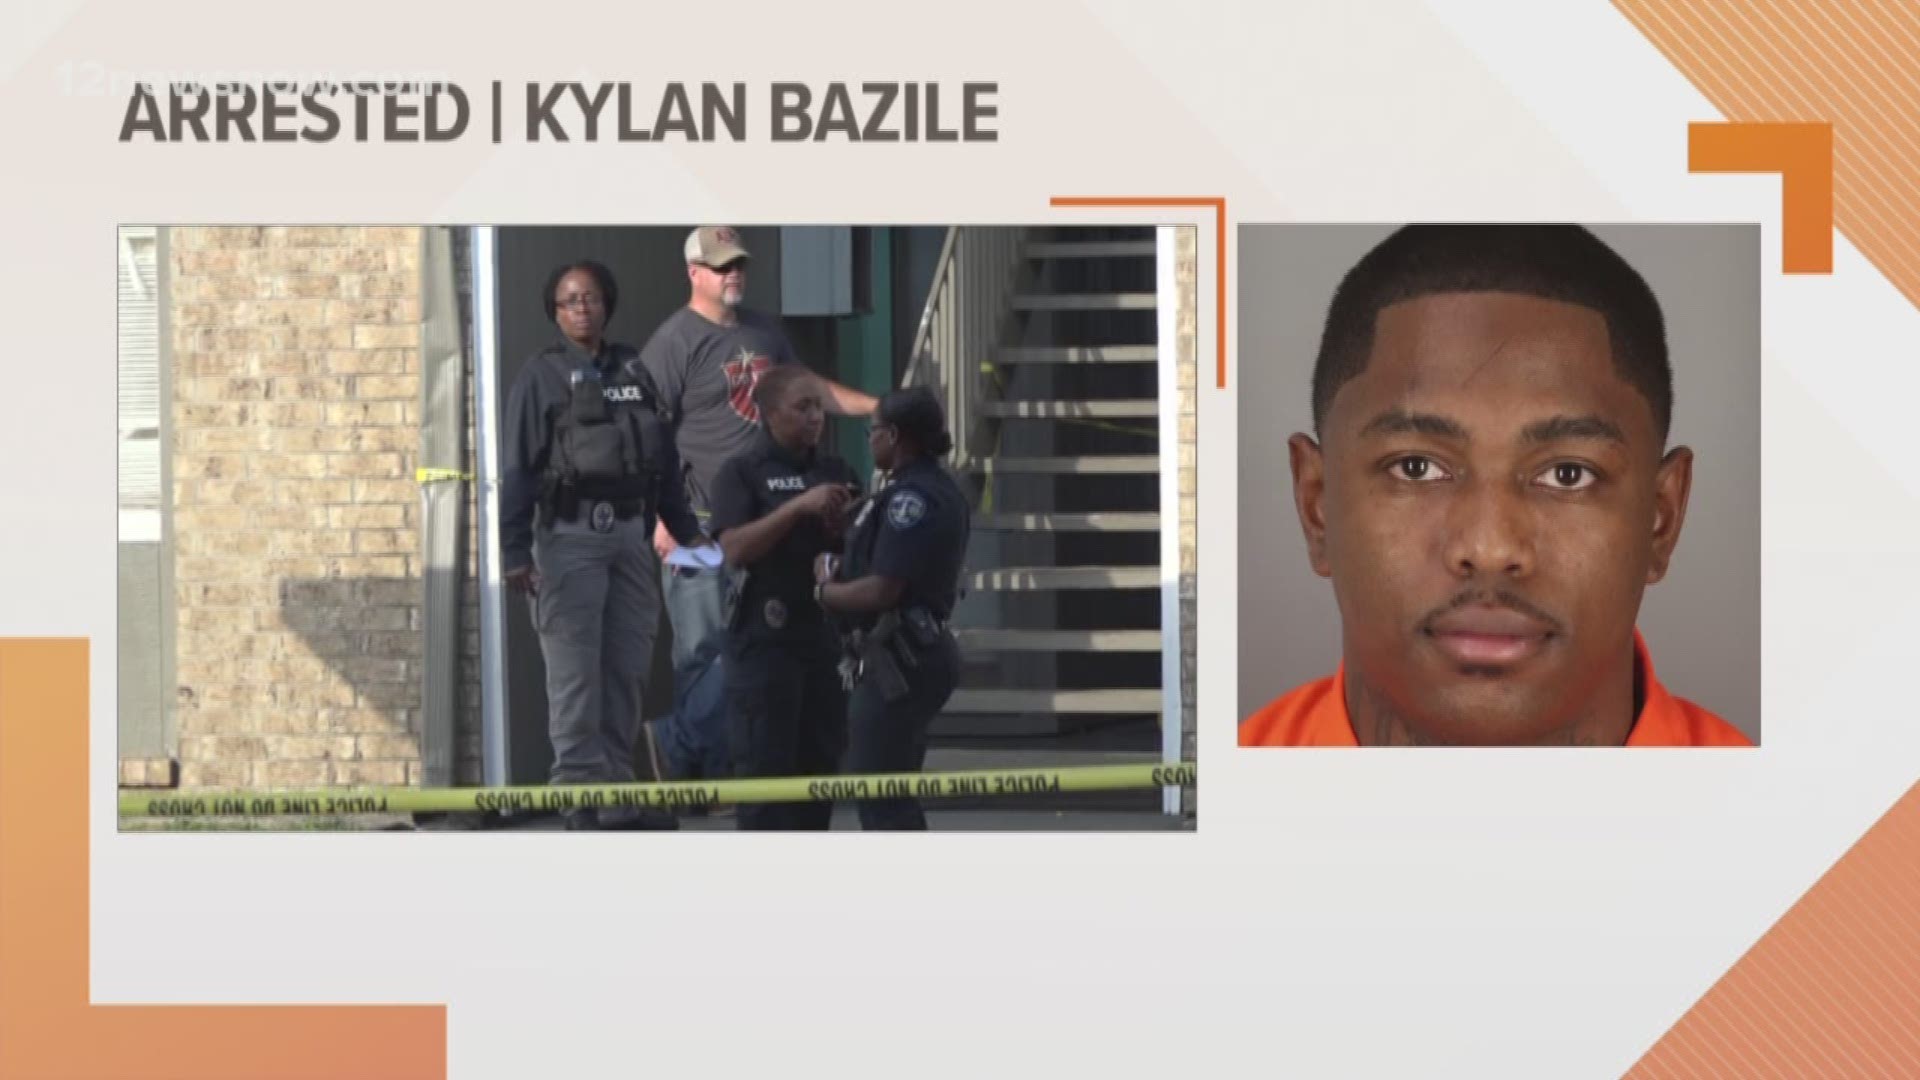 Kylan Deion Bazile, 22, was arrested Tuesday by Jefferson County deputies and taken to the Jefferson County Correctional Facility according to Port Arthur Police.